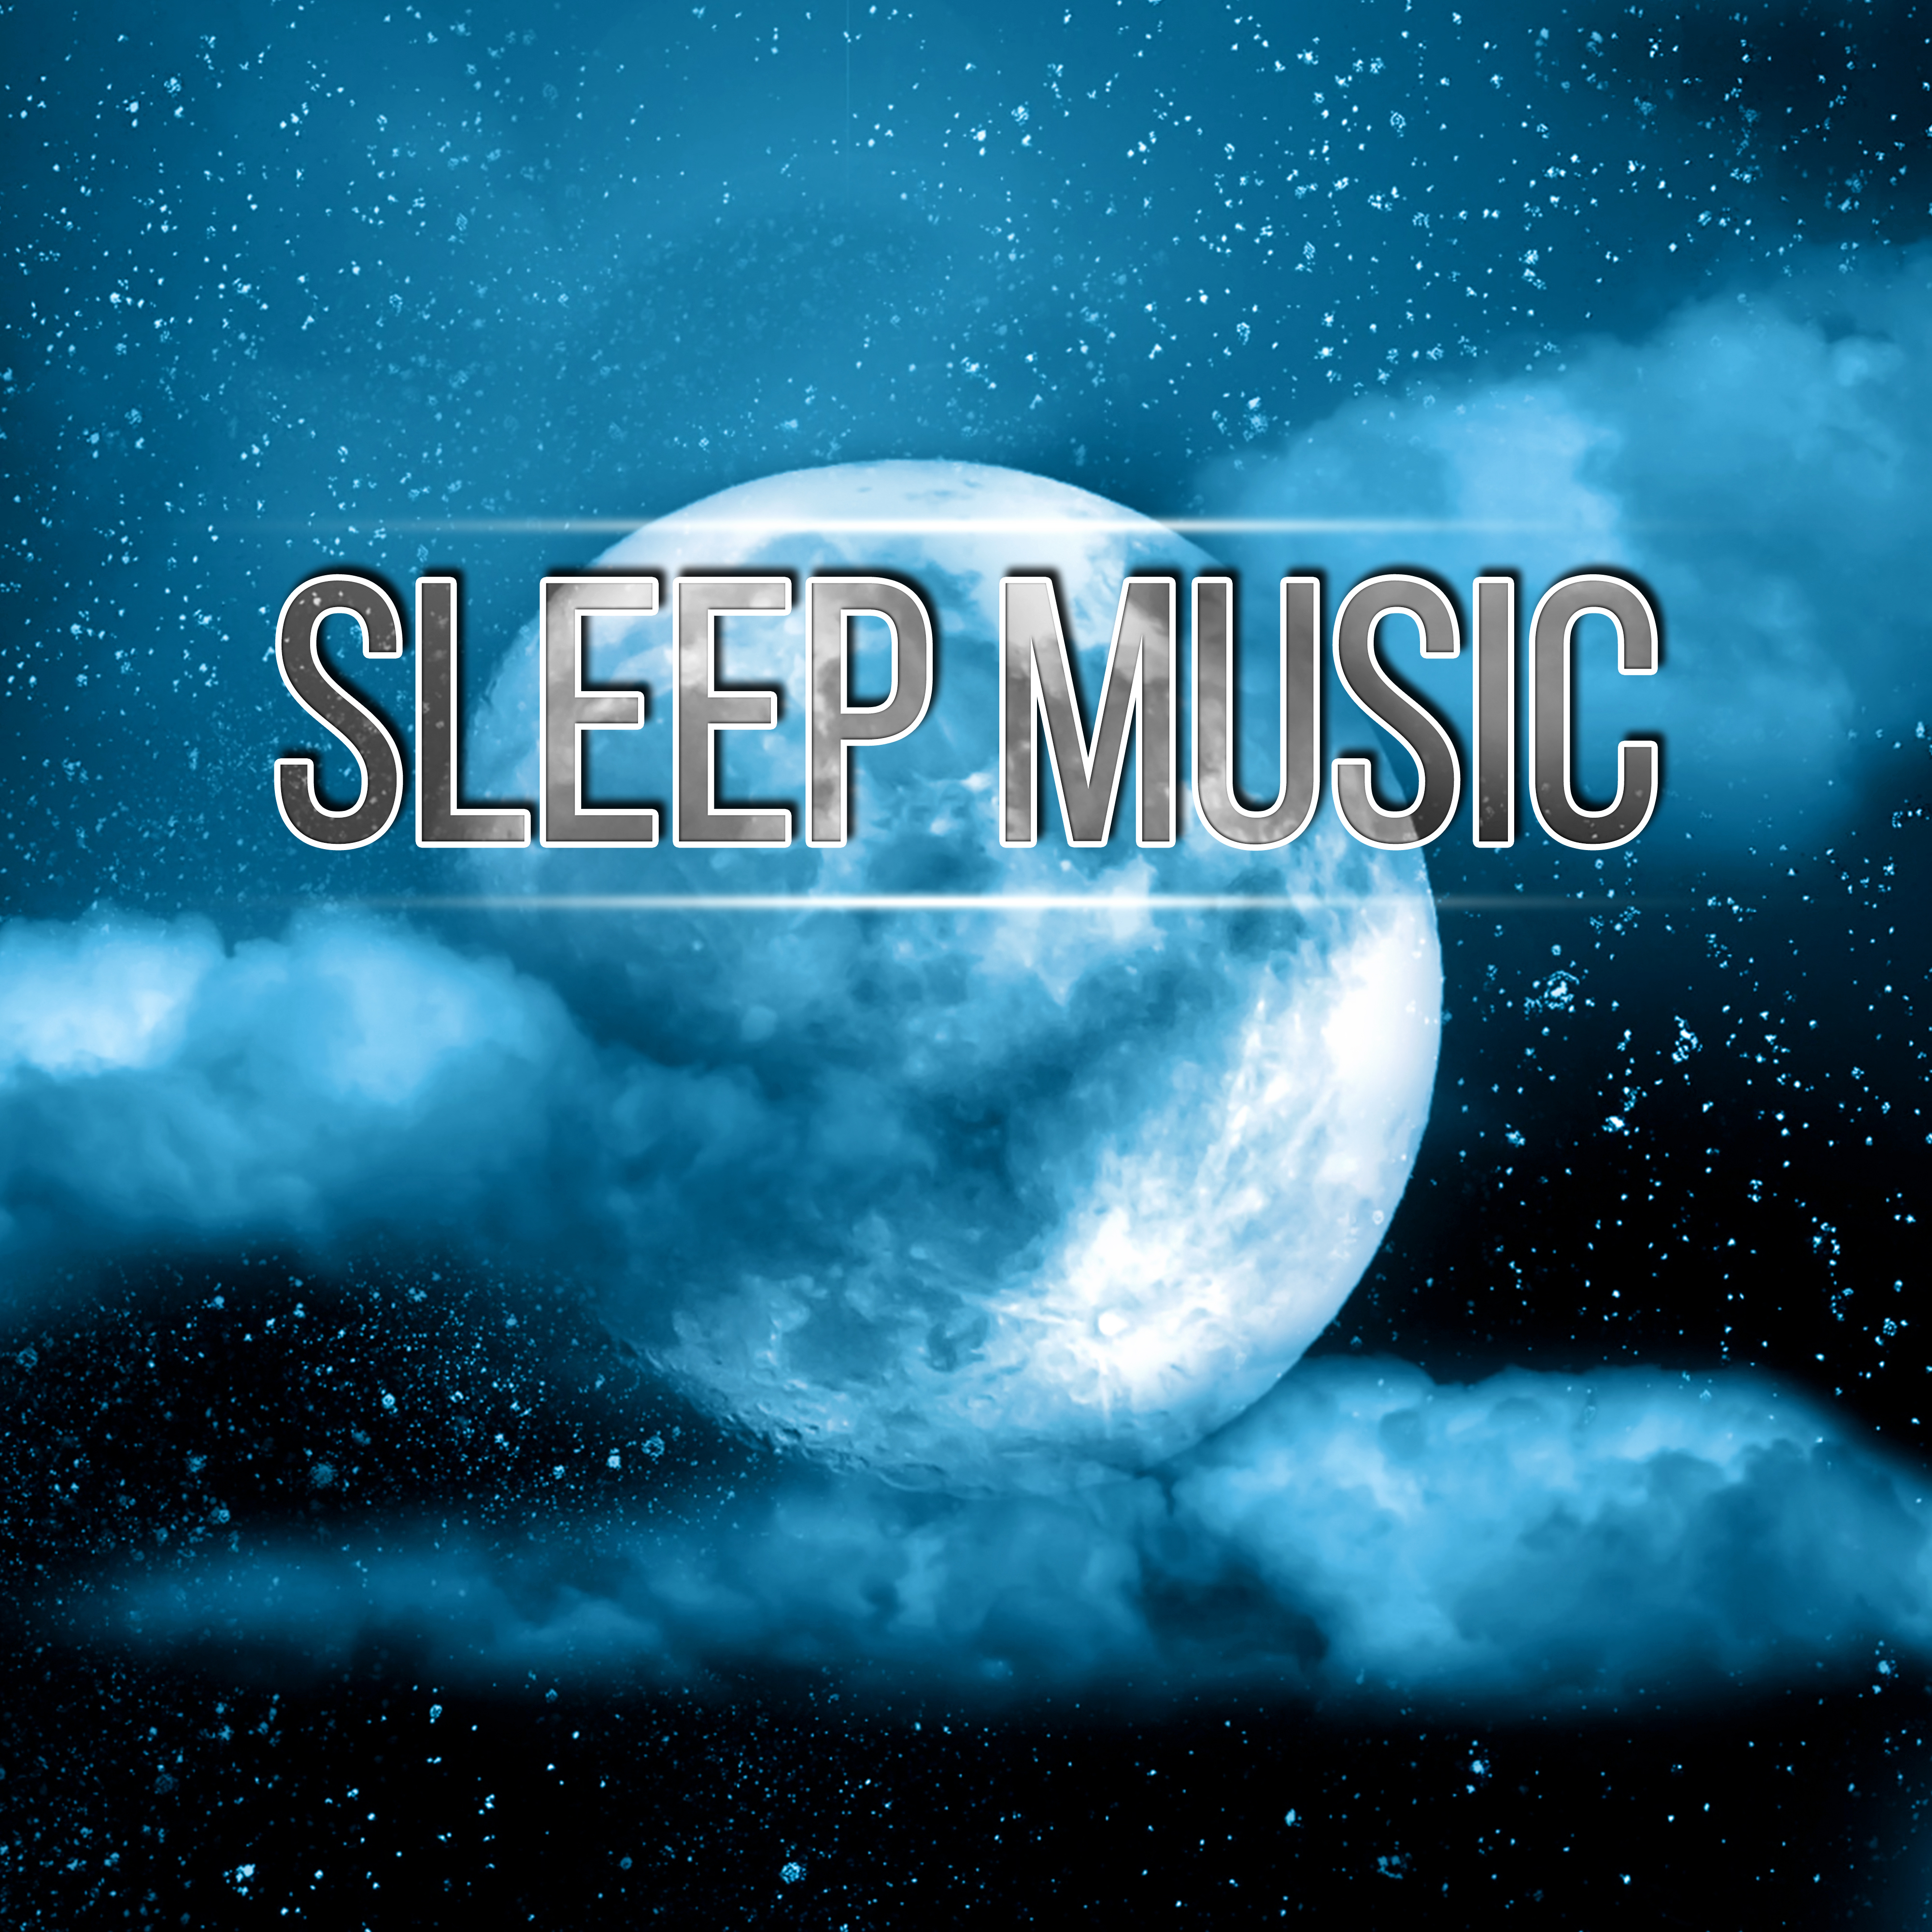 Sleep Music - Music and Sounds of Nature for Deep Sleep, Relaxing Sounds and Long Sleeping Songs to Help You Relax at Night, Massage Therapy & Relaxation